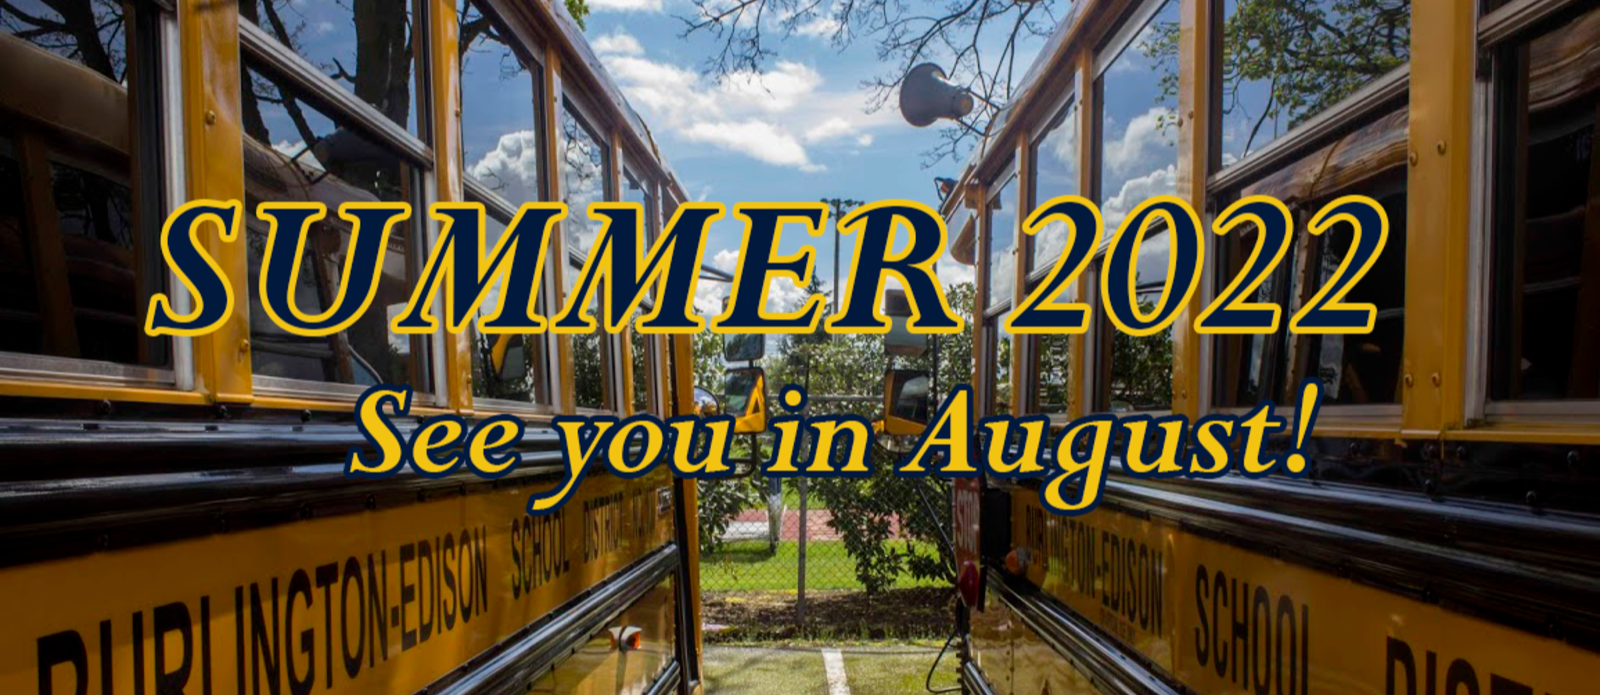 Summer 2022 See you in August!